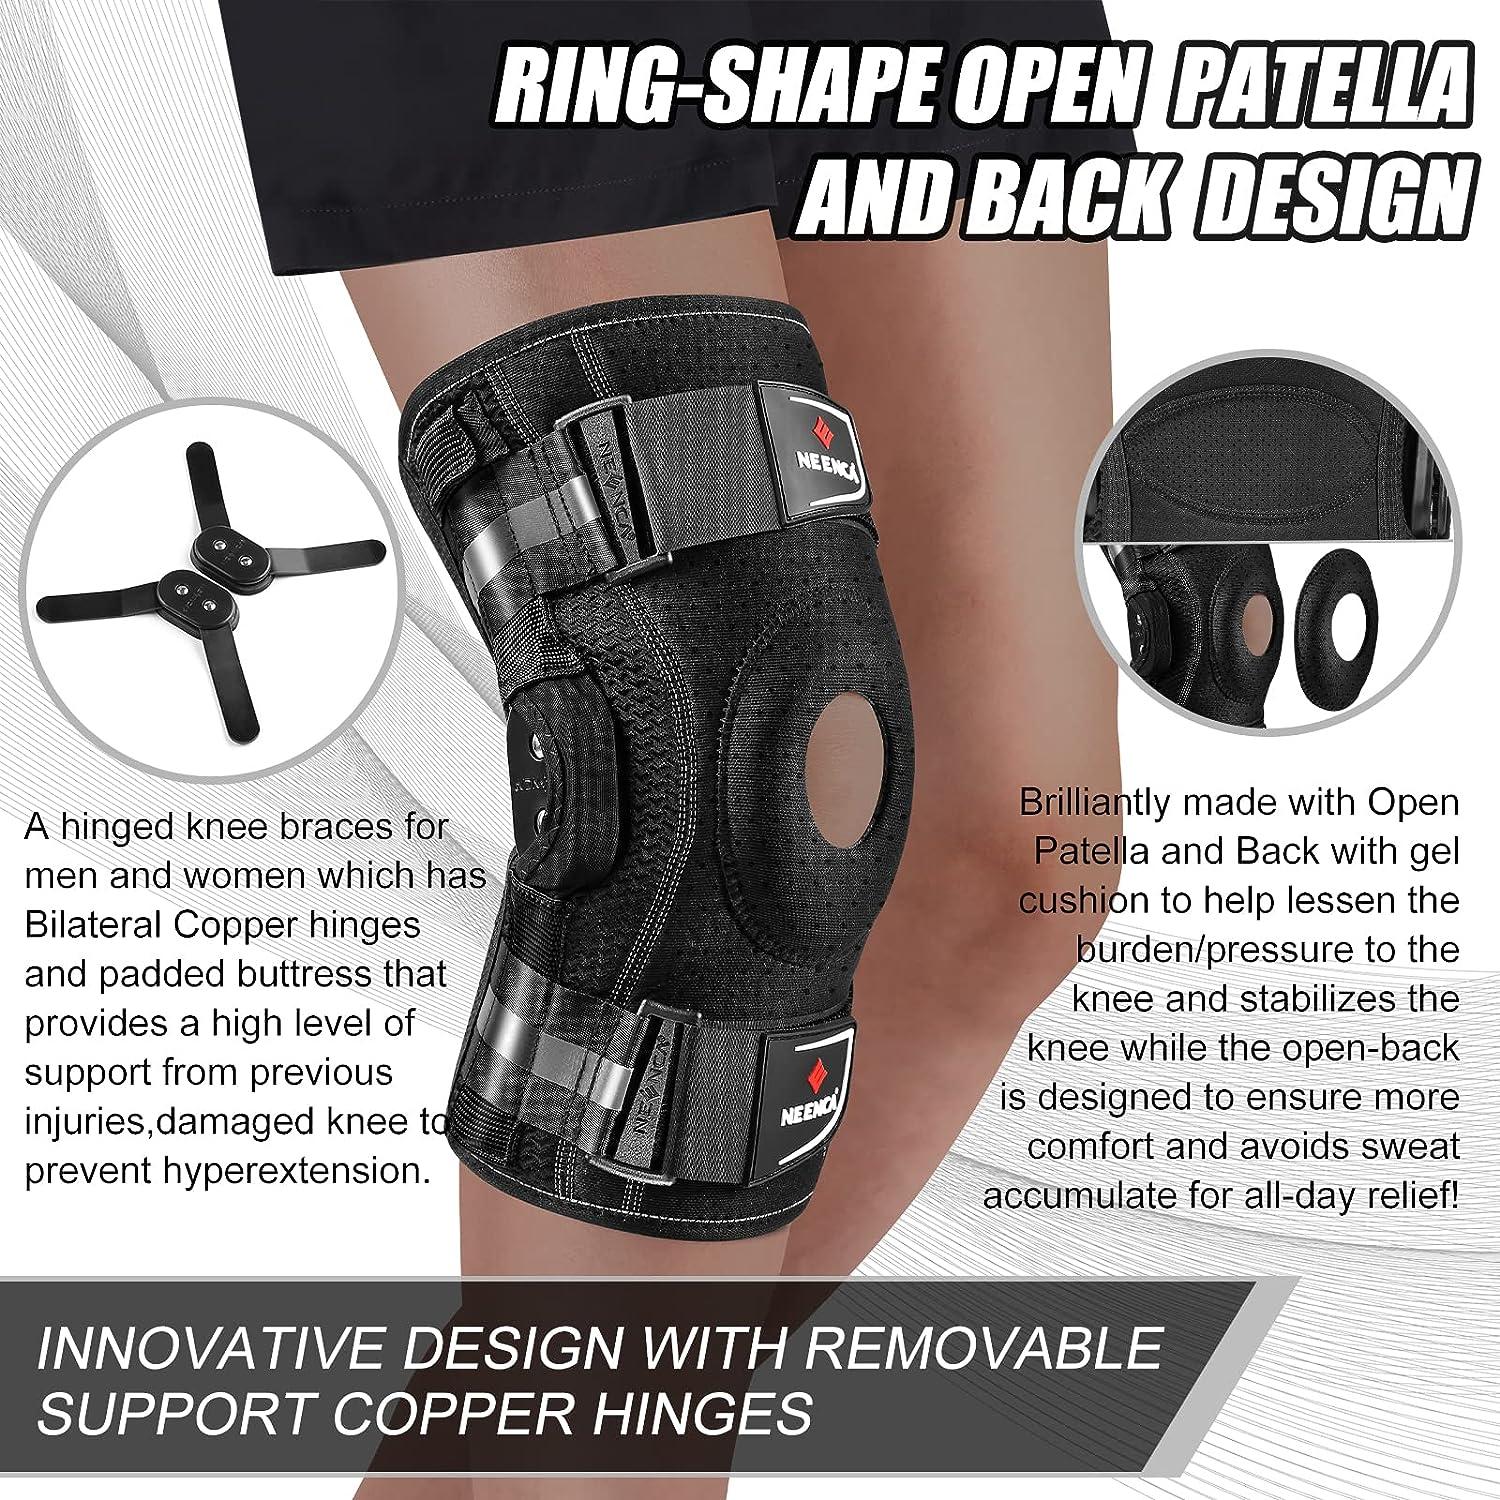 Modvel Knee Brace for Knee Pain Relief, Joint Stability and Recovery with  Patella Gel and Side Support – MODVEL